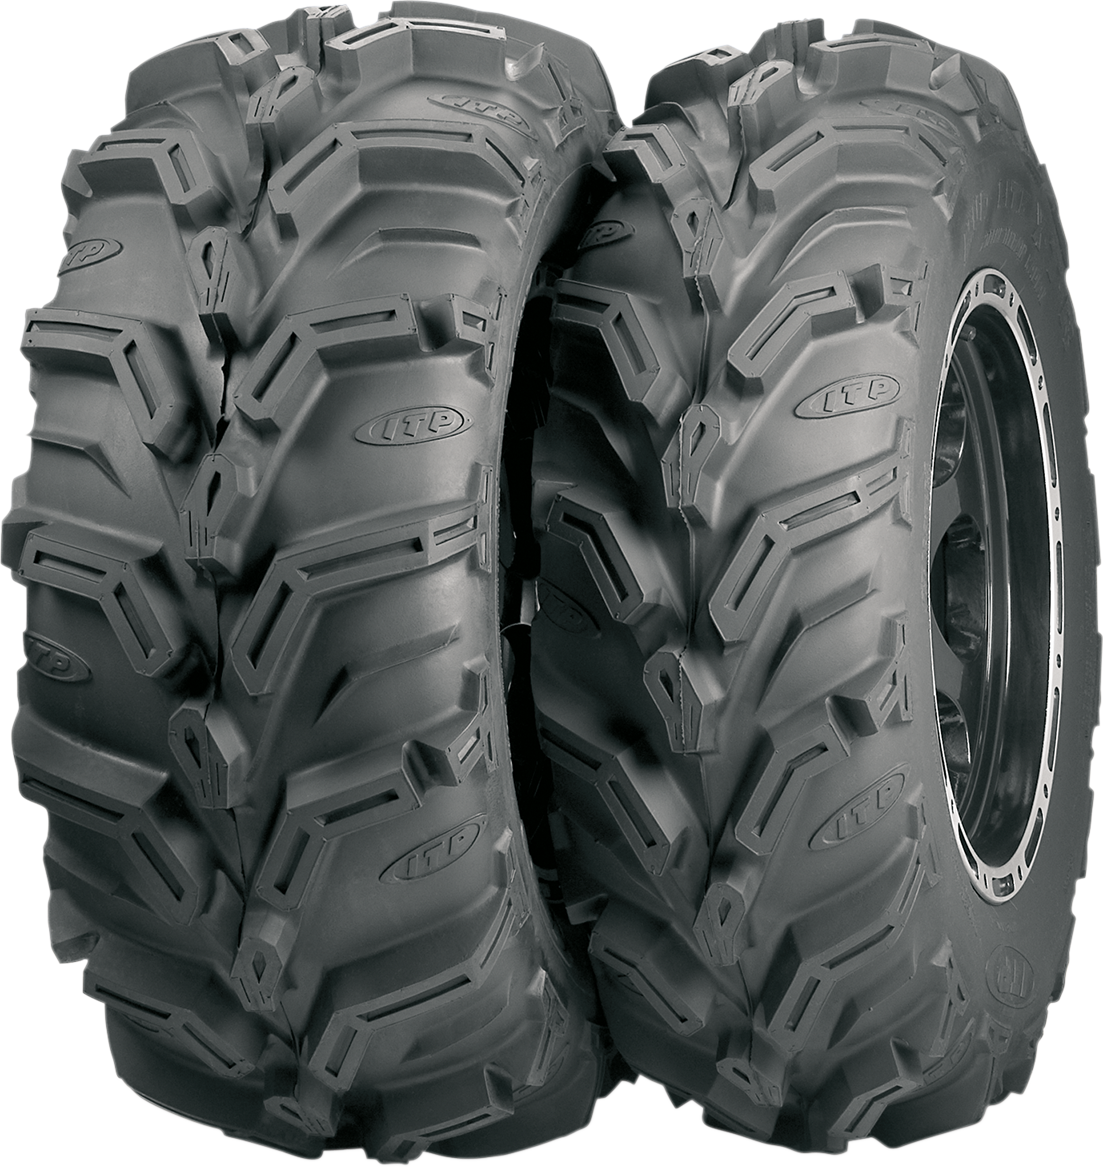 ITP Tire - Mud Lite XTR - Front/Rear - 26x9R12 - 6 Ply 560387